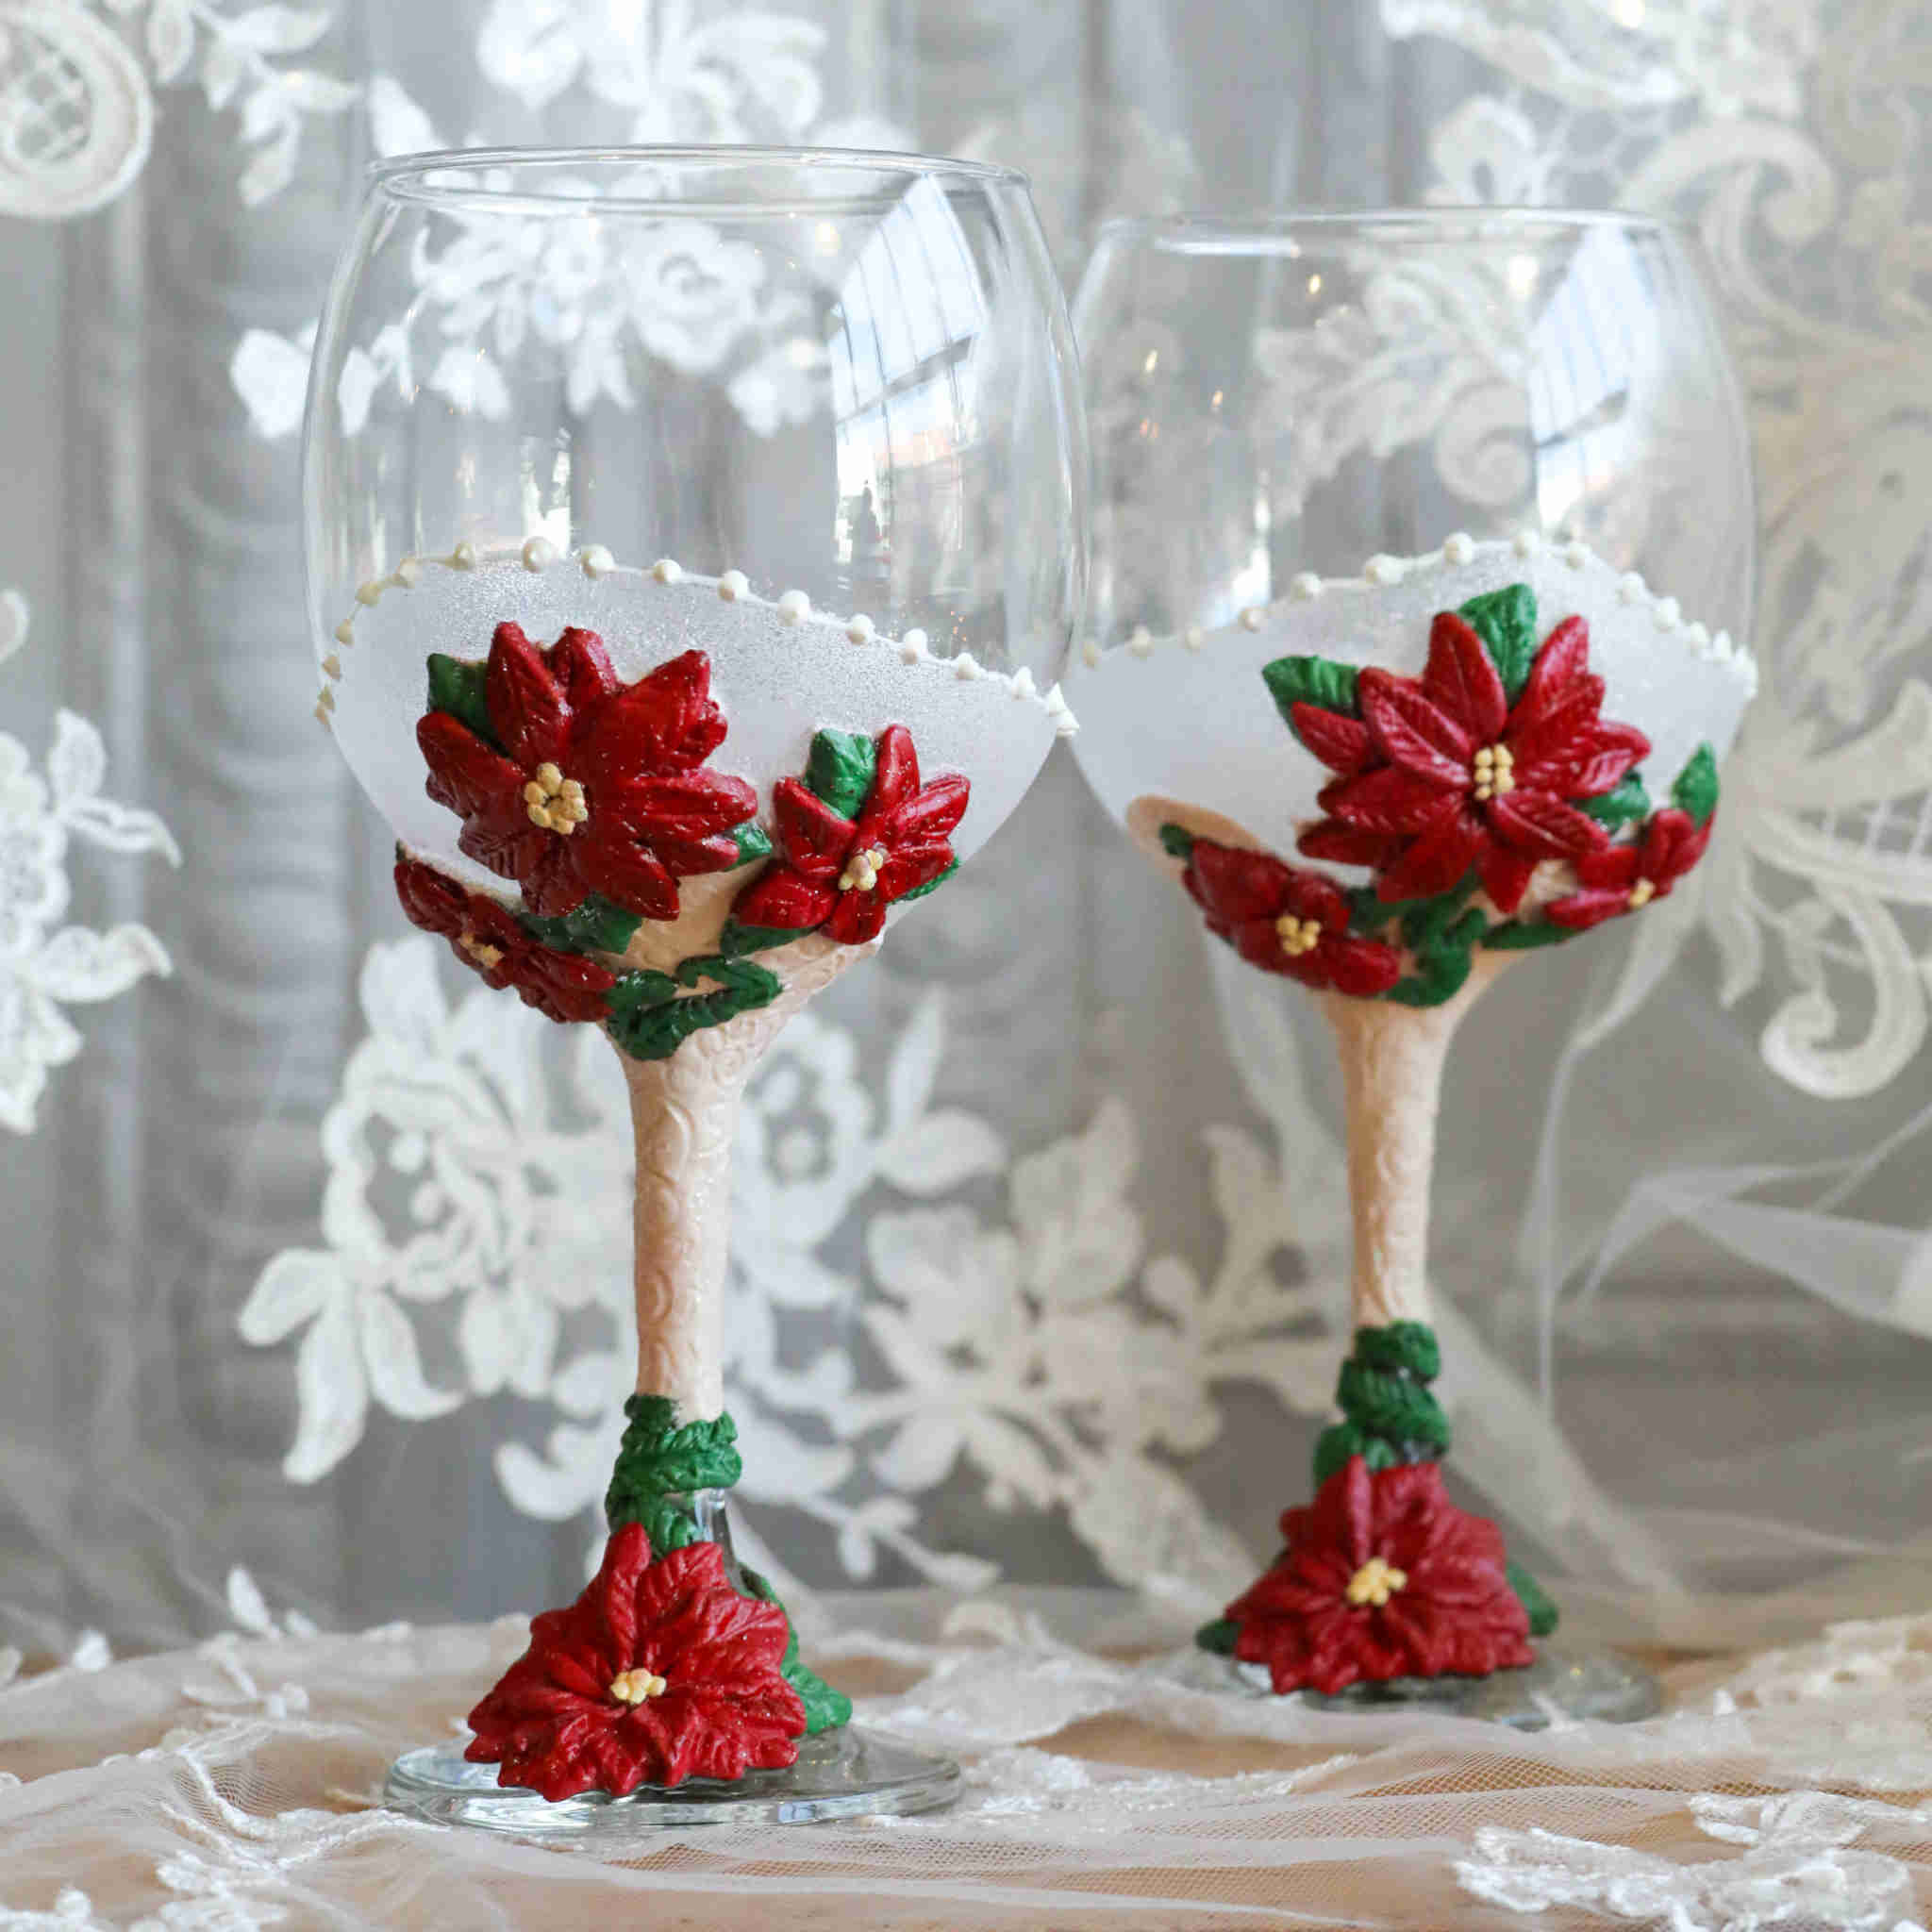 How To - Home & Family: Decorative Wedding Champagne Flutes